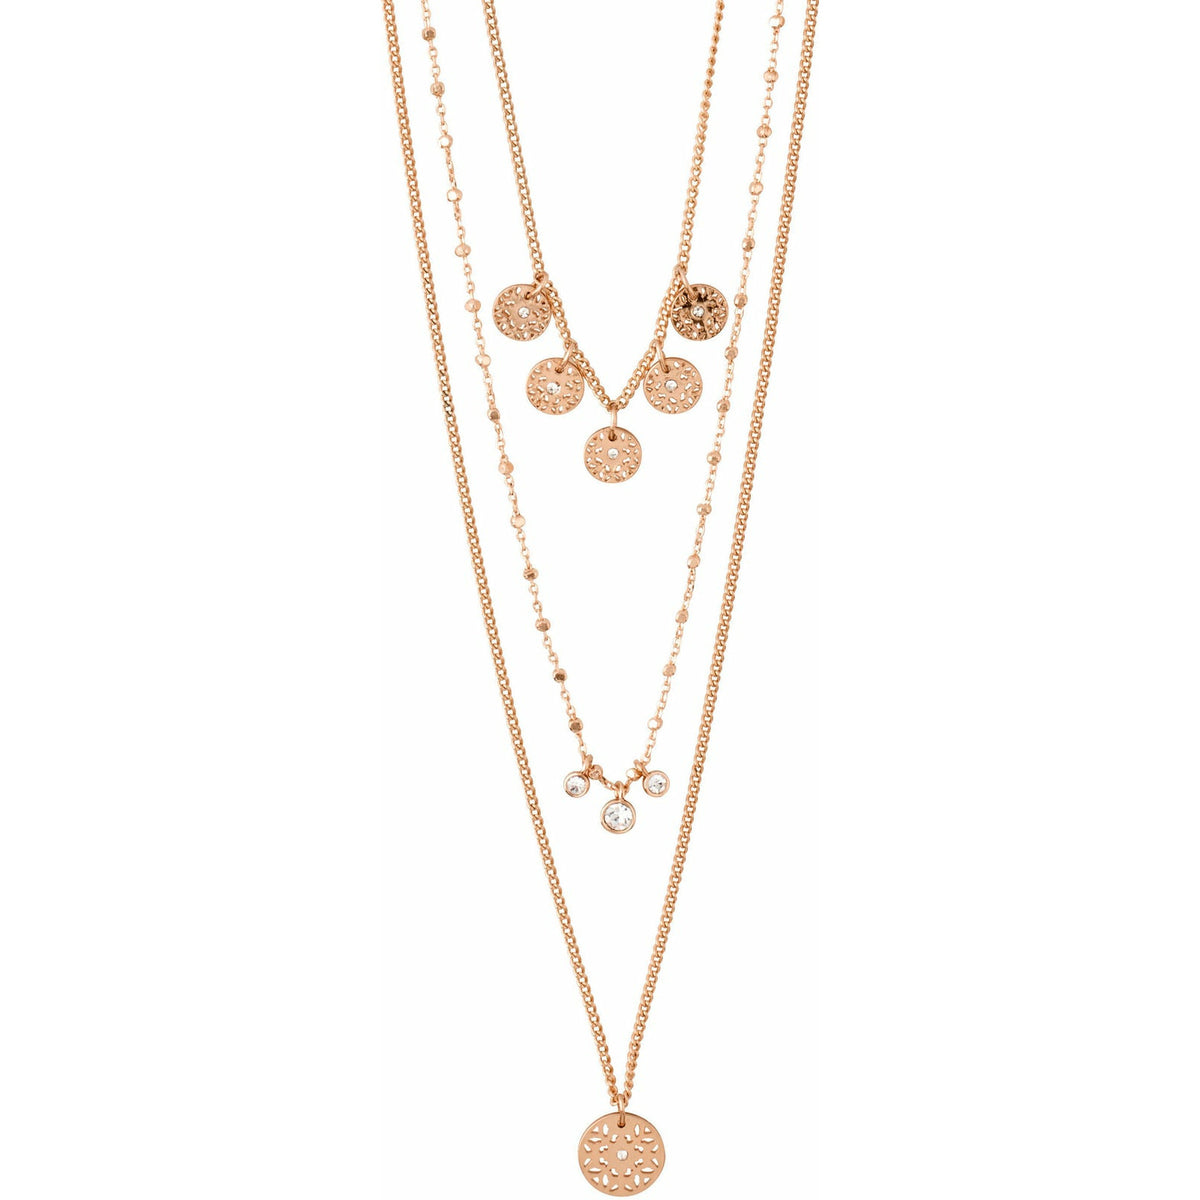 Pilgrim Jewellery Carol Layered 3 in 1 Rose Gold-Plated  Necklace